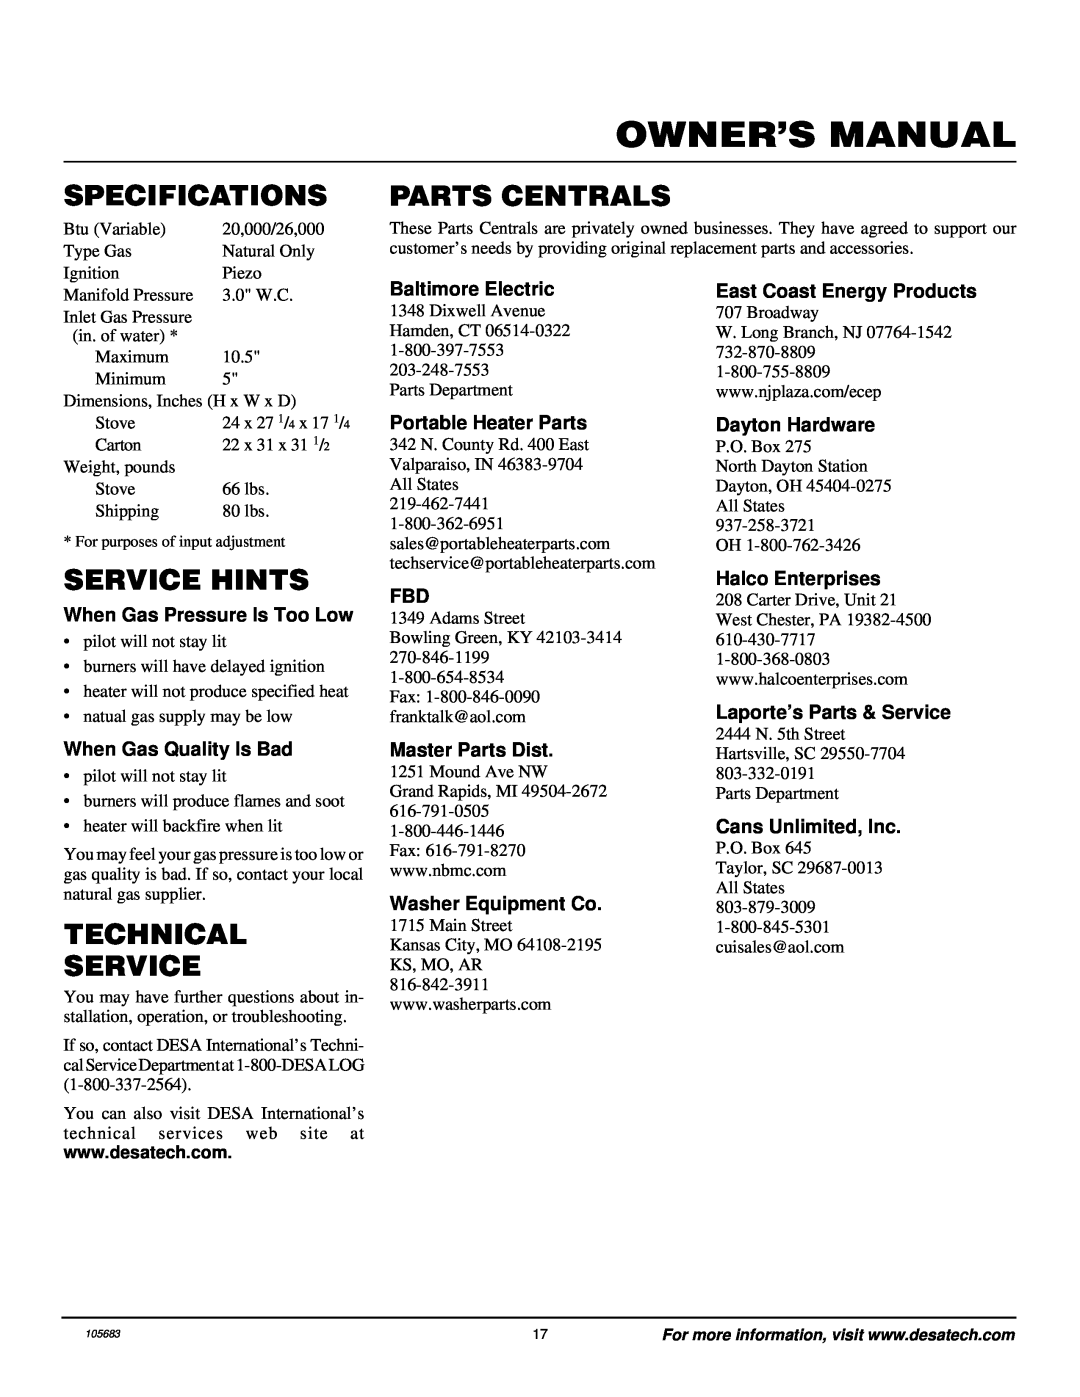 Desa S26NT installation manual Specifications, Parts Centrals, Service Hints, Technical Service, Owner’S Manual 